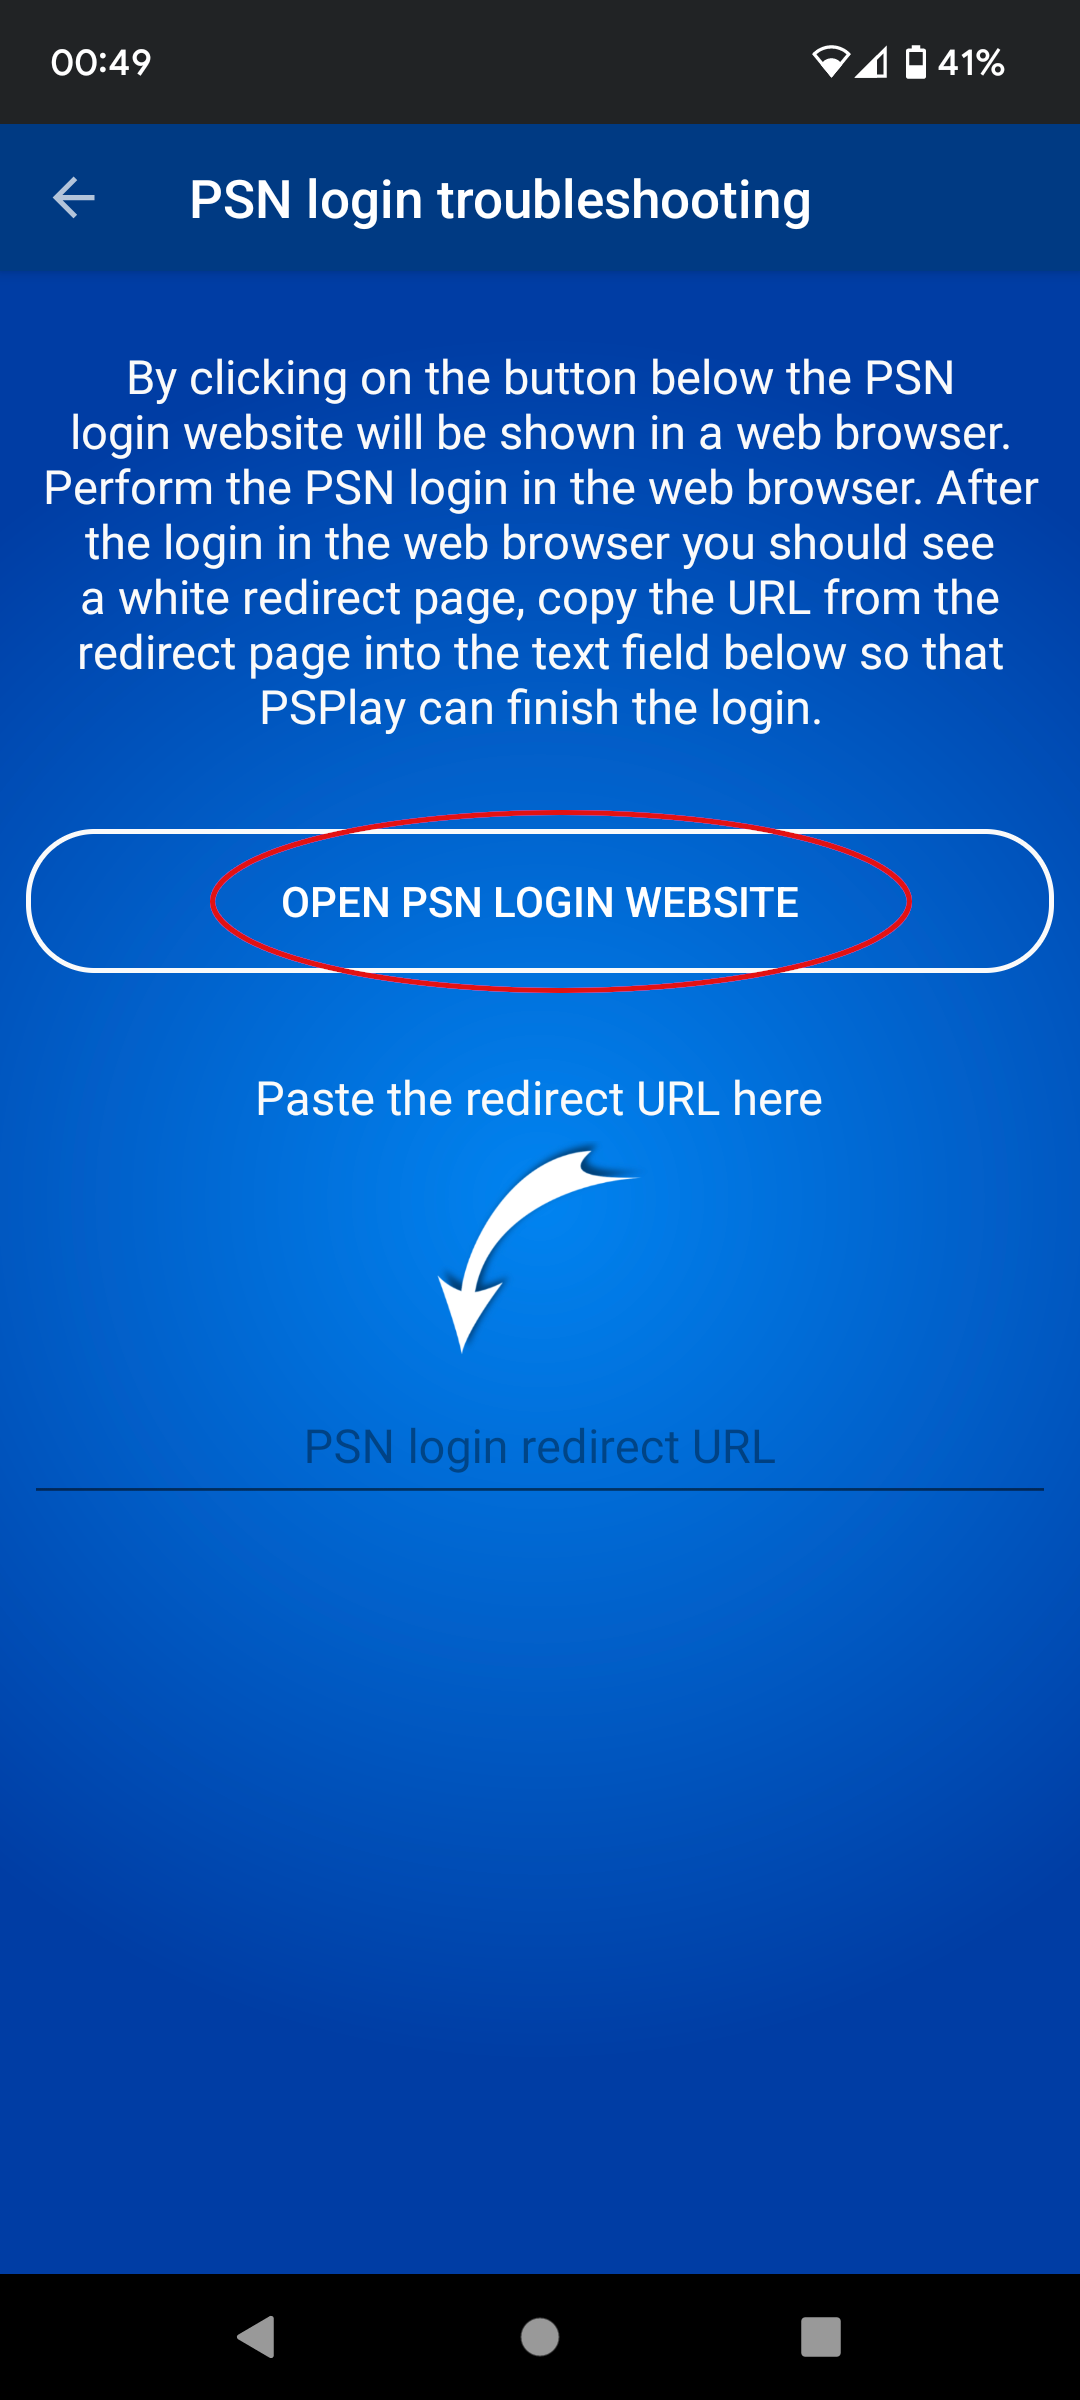 Troubleshoot sign-in issues on PSN